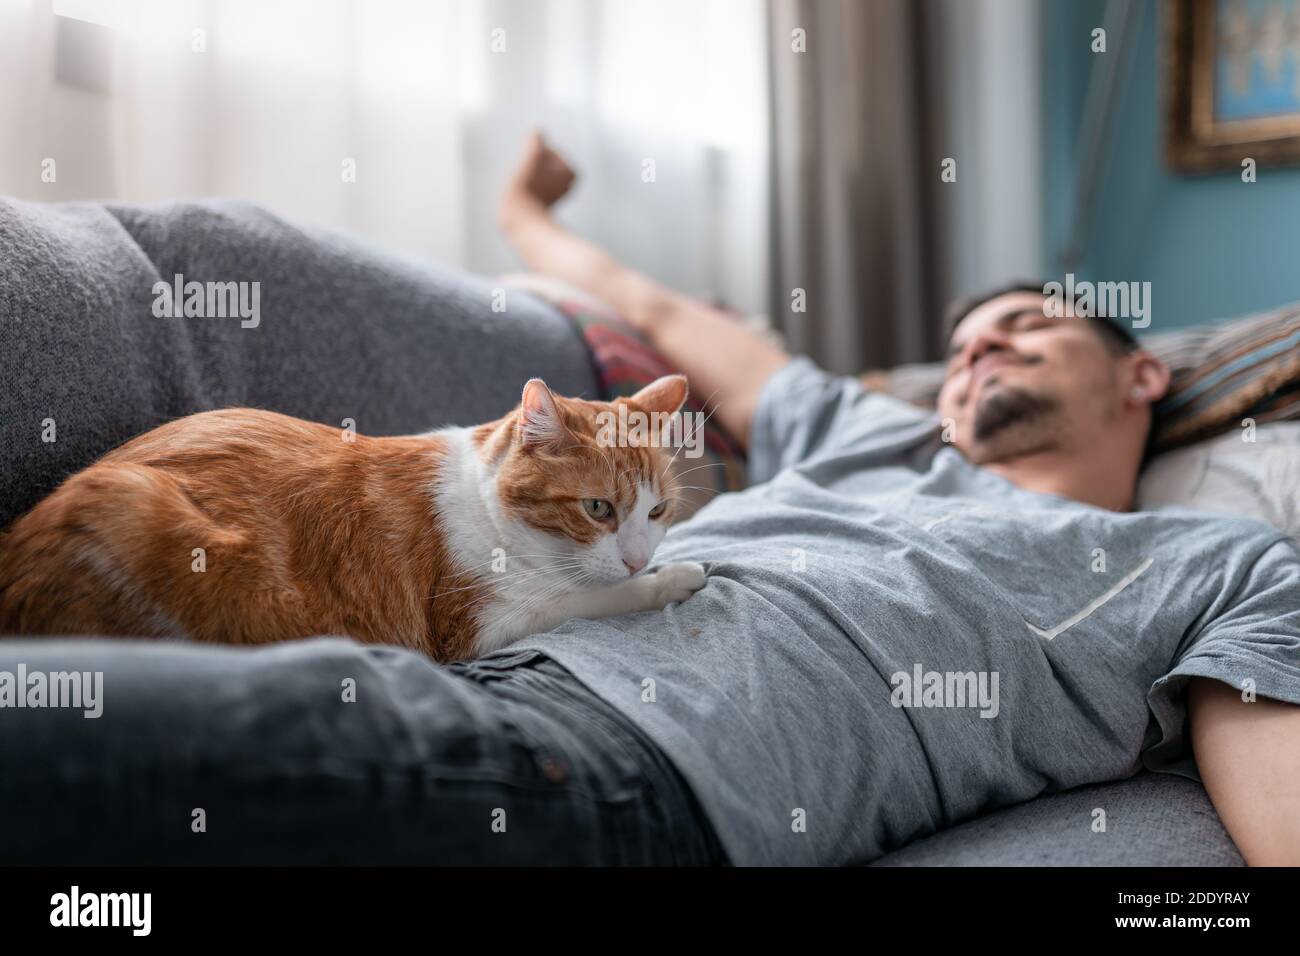 white and brown cat lying on top of a young man stretching his arms after sleeping Stock Photo